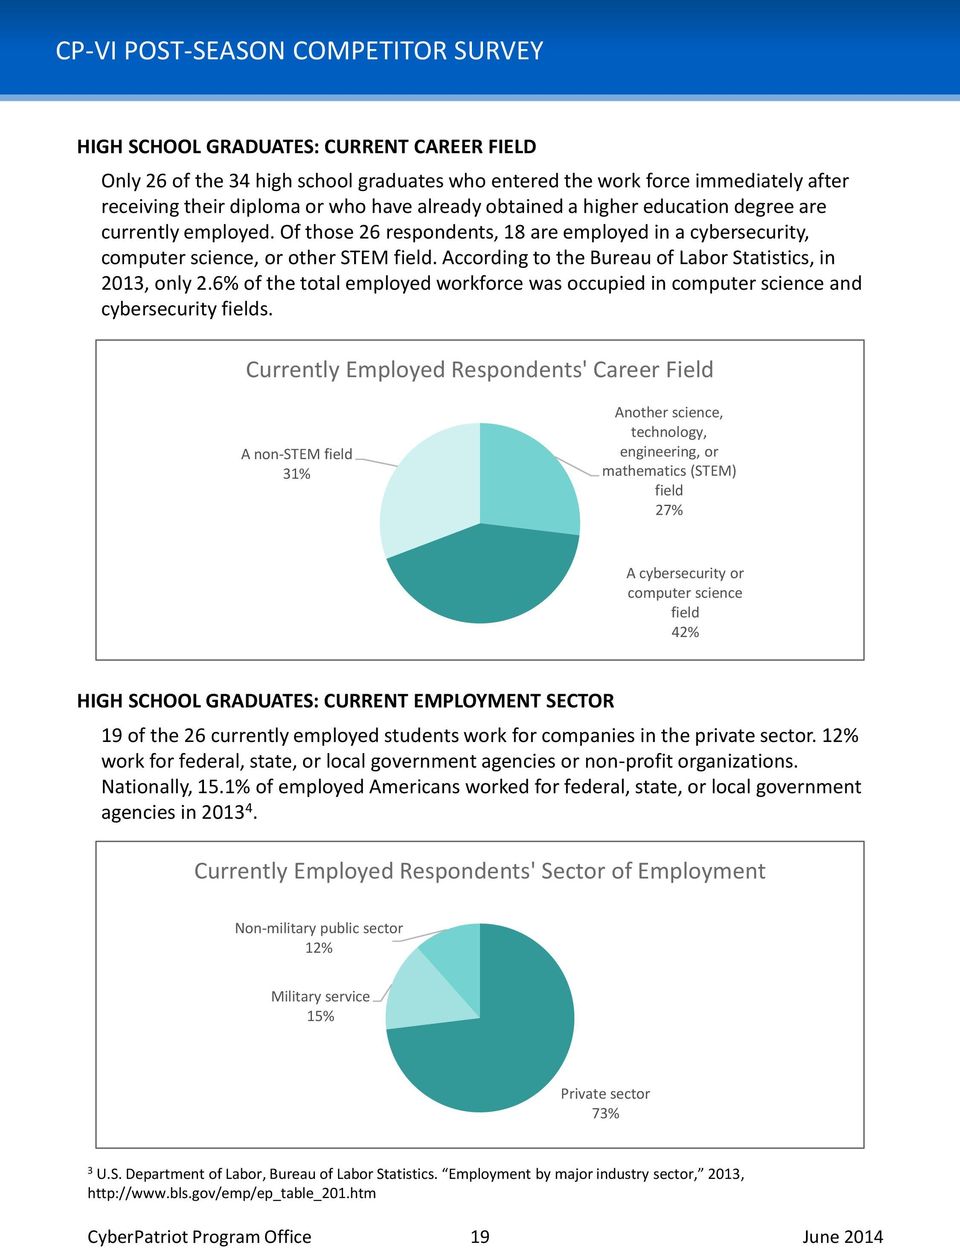 According to the Bureau of Labor Statistics, in 2013, only 2.6% of the total employed workforce was occupied in computer science and cybersecurity fields.